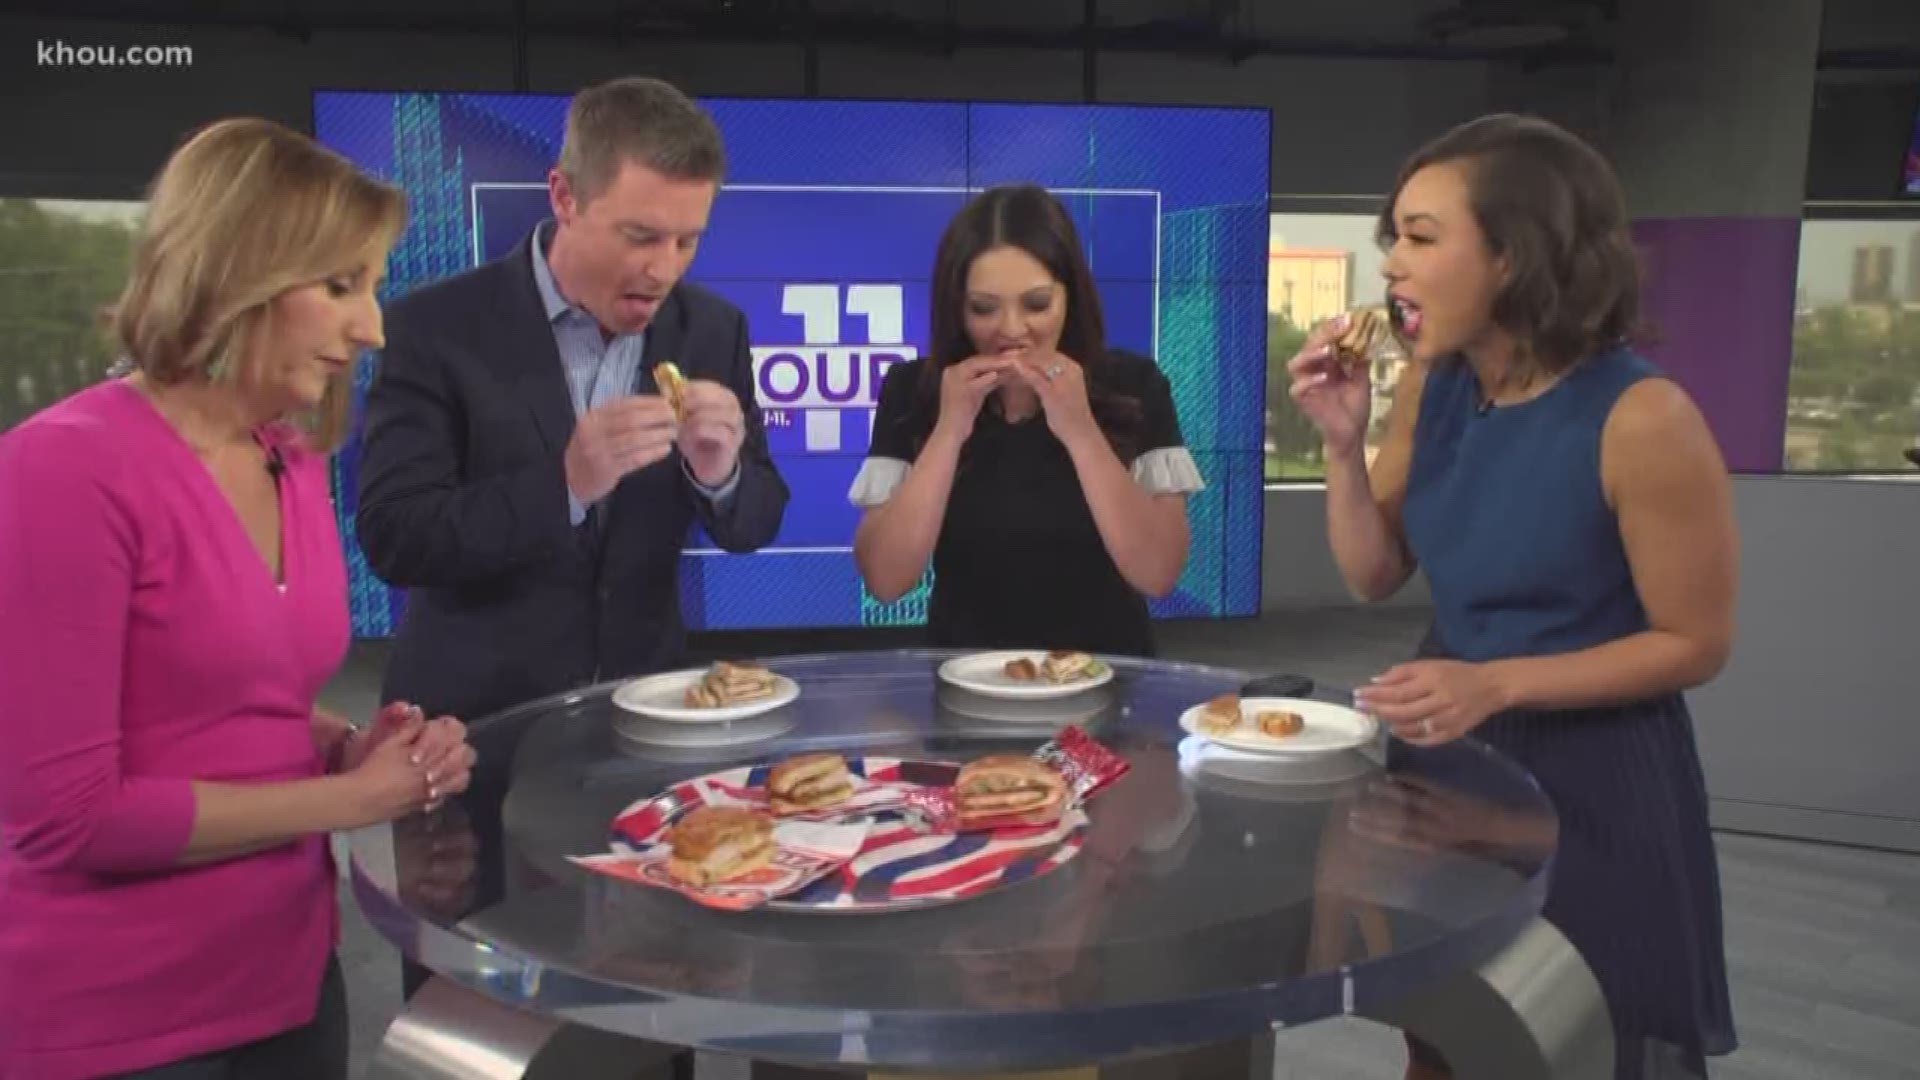 When Popeye's launched it's new chicken sandwich, Chick-fil-A clapped back and then Wendy's jumped into the fray, launching #ChickenWars. KHOU 11 reporter Tiffany Craig decided to see which one cuts the mustard with Anchors Russ Lewis and Rekha Muddaraj and Meteorologist Erika Lopez.